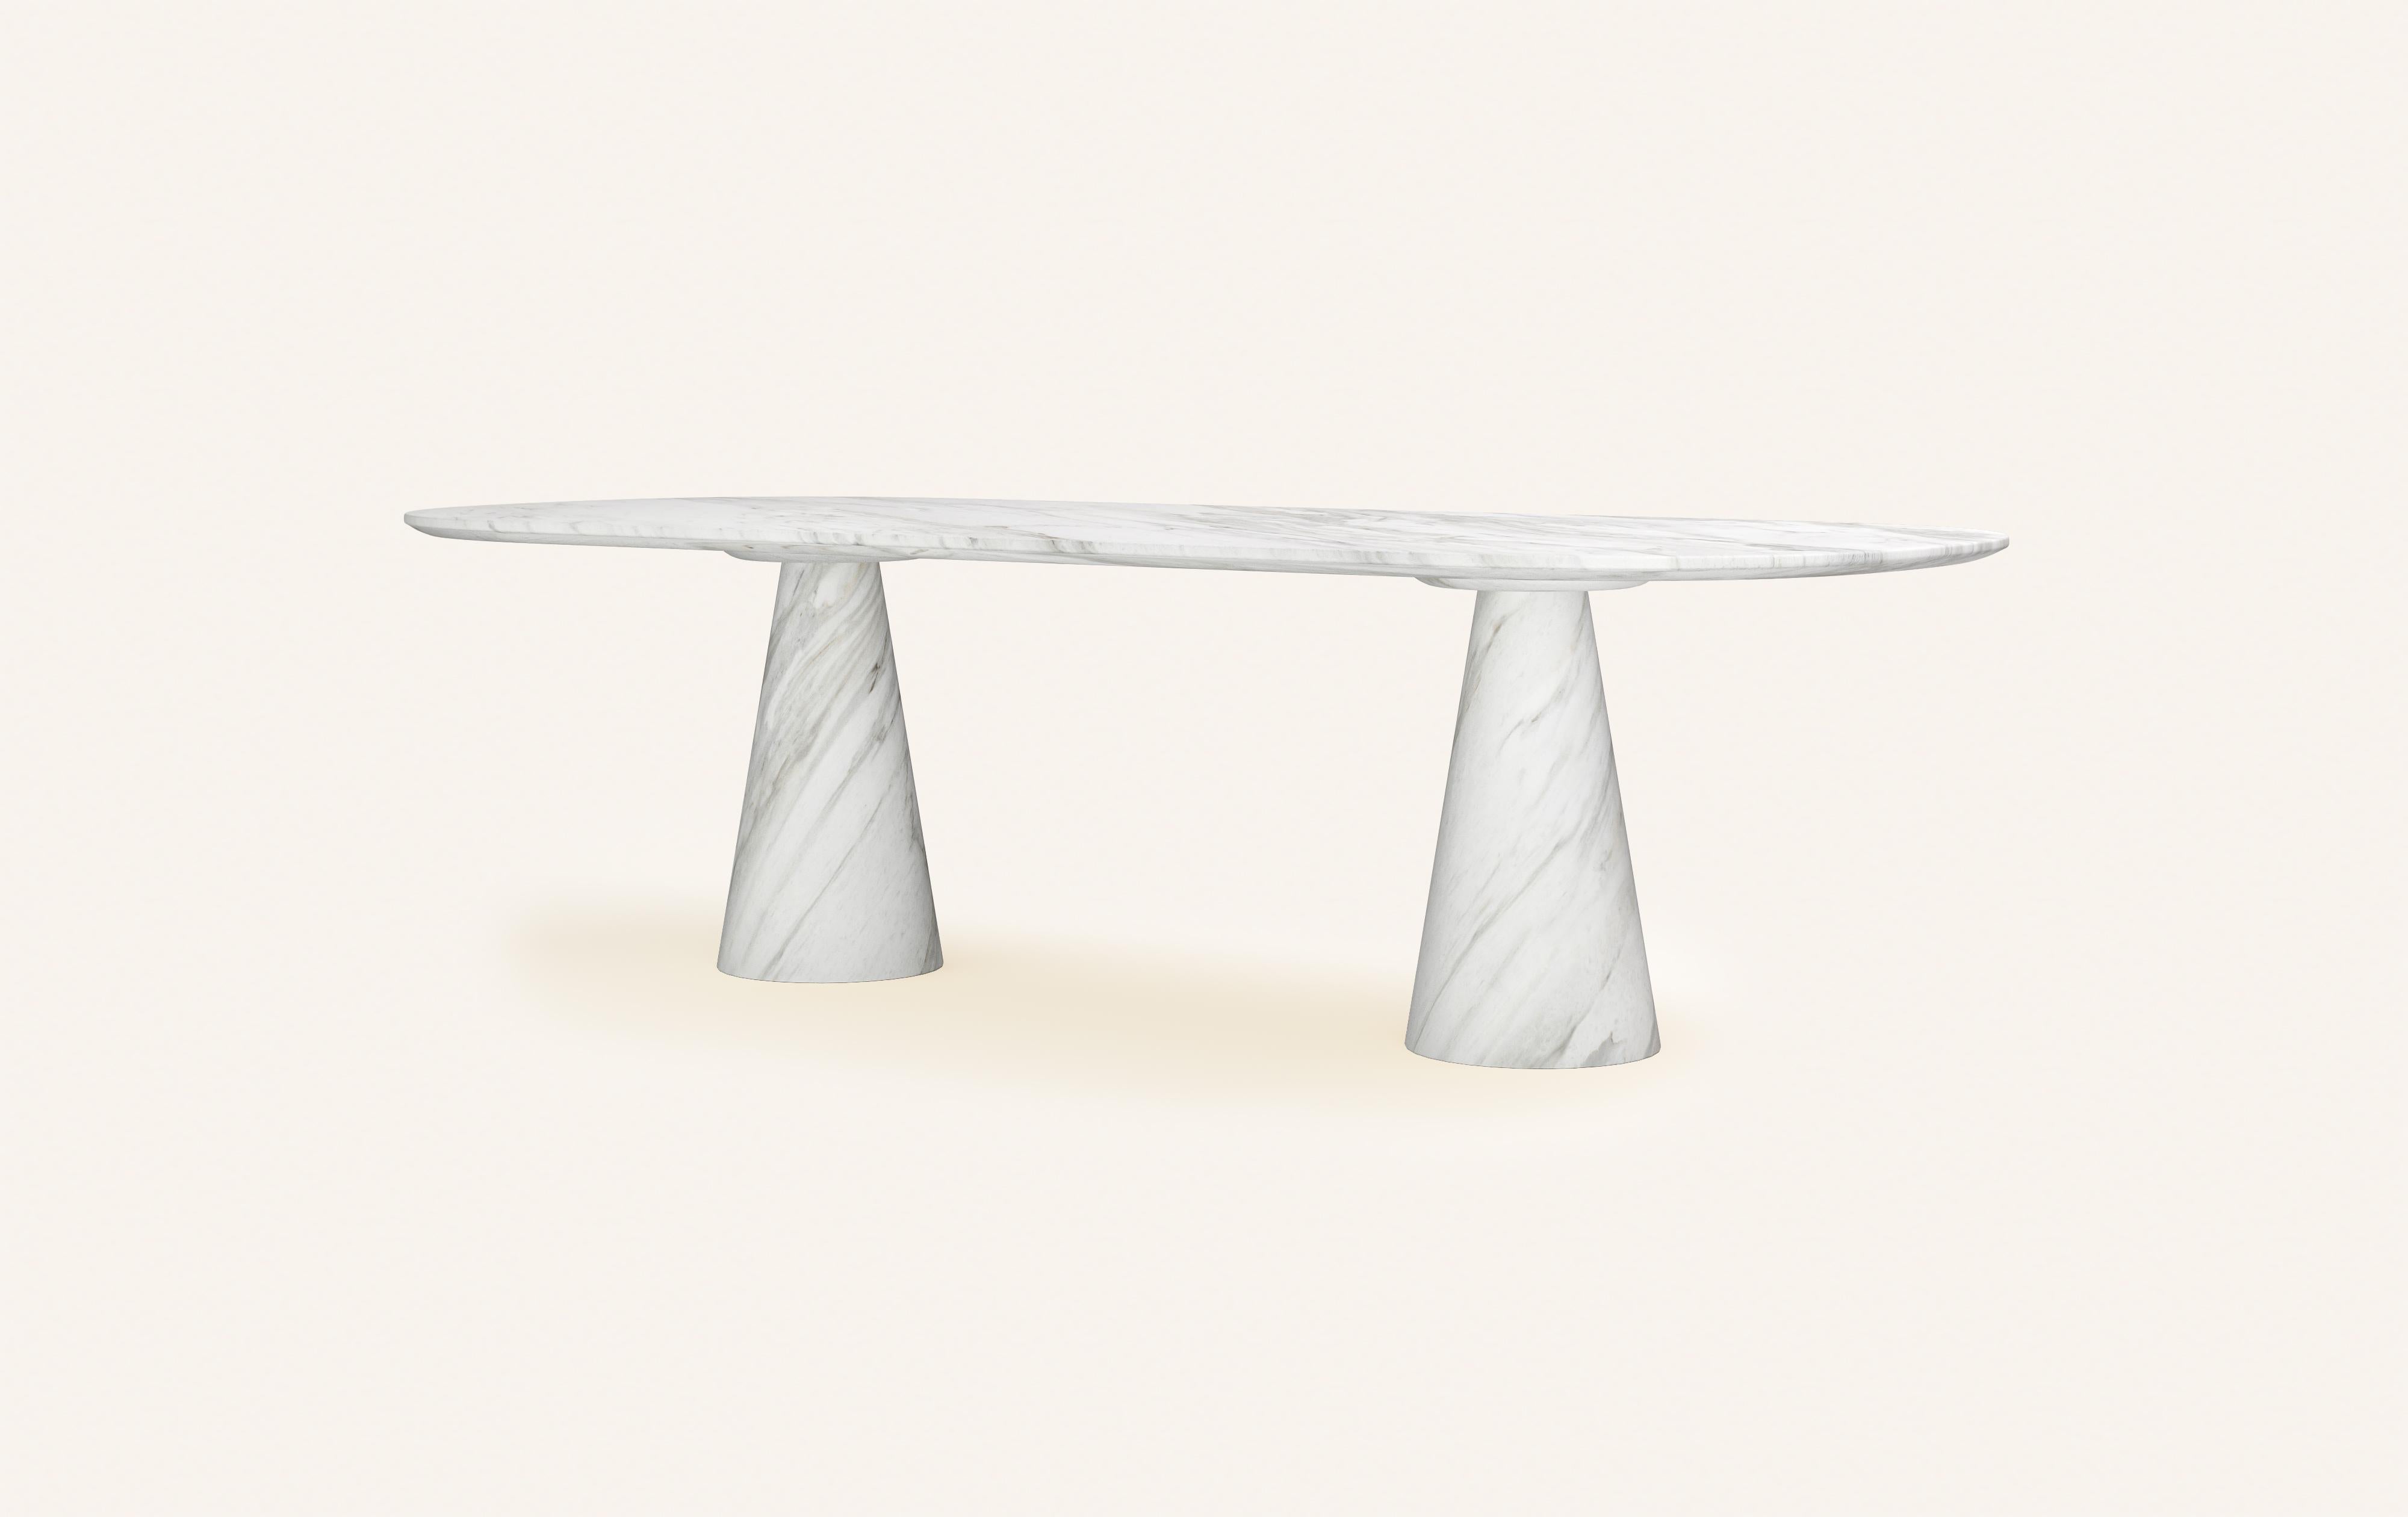 Organic Modern FORM(LA) Cono Oval Dining Table 84”L x 42”W x 30”H Volakas White Marble For Sale